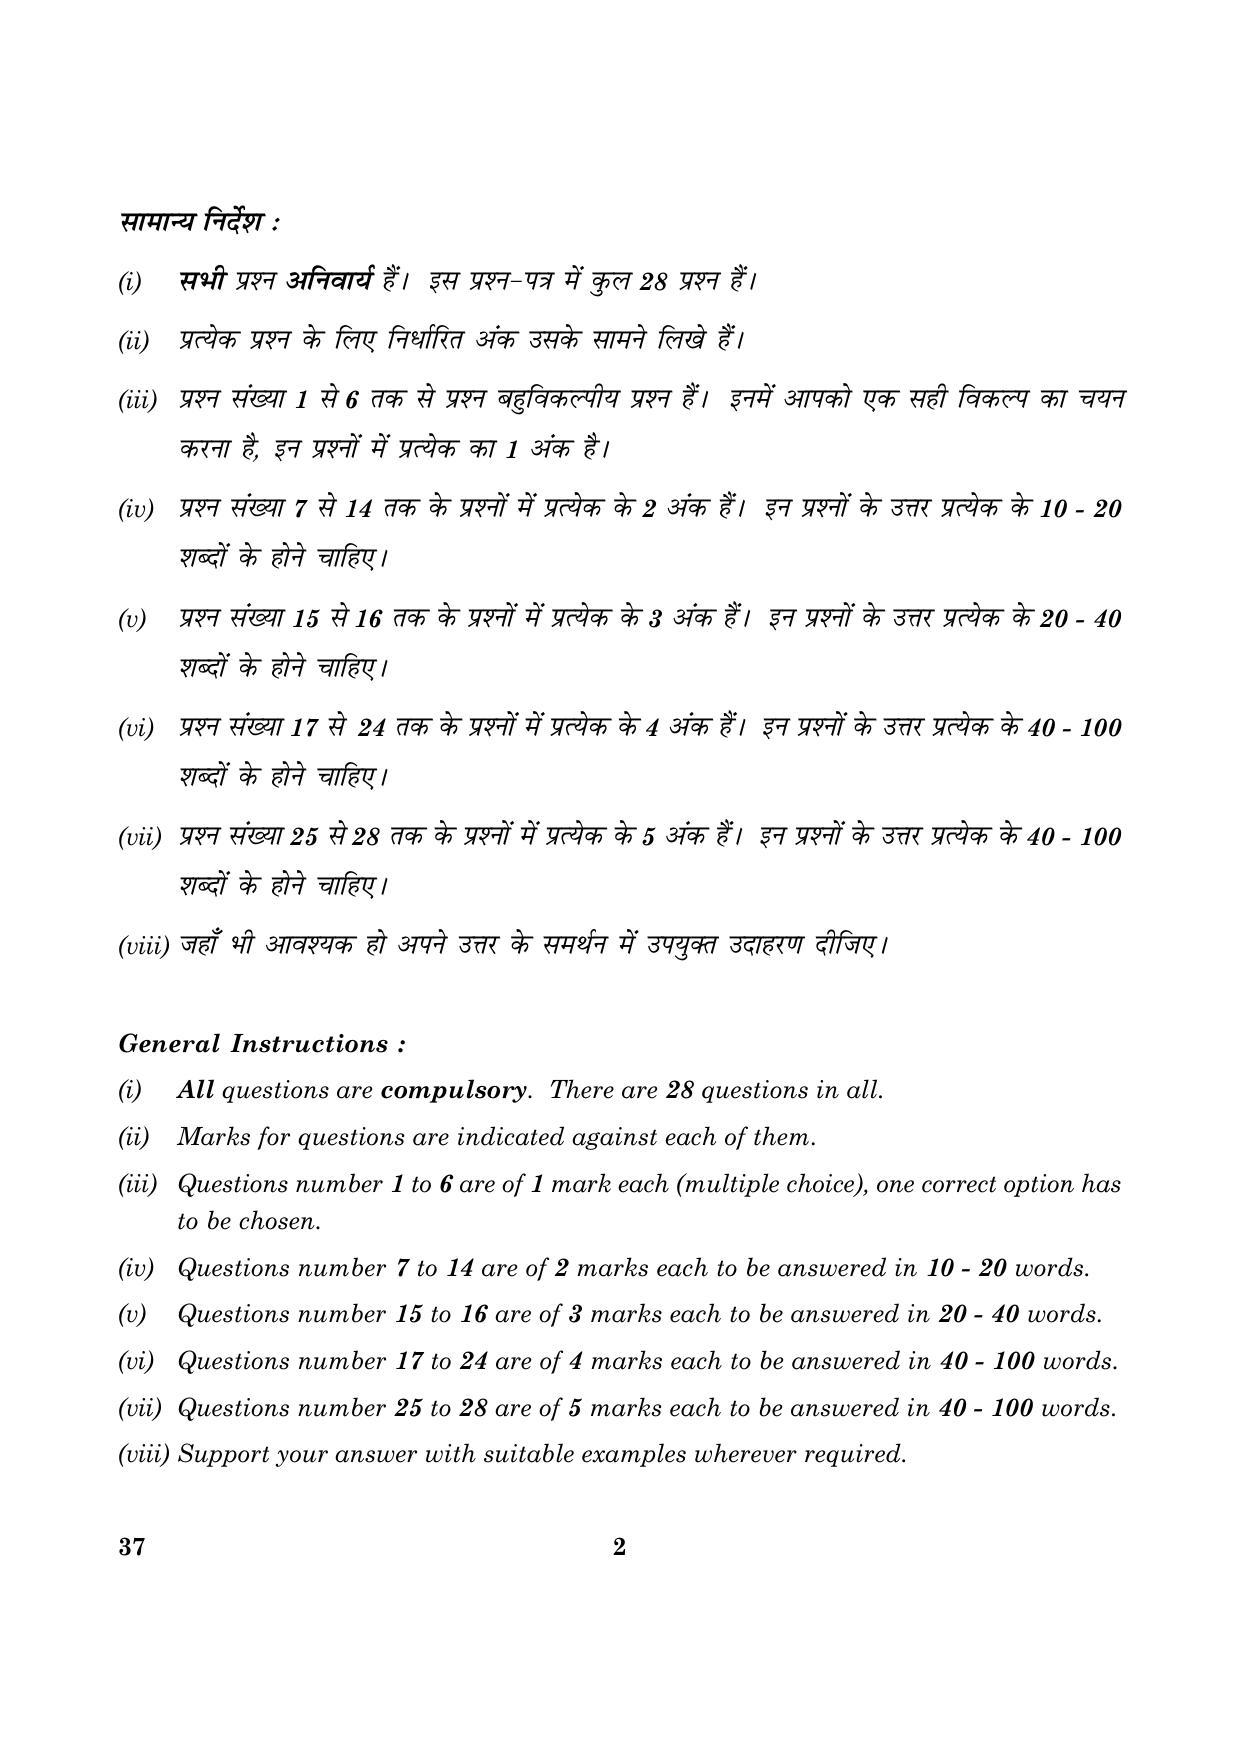 CBSE Class 10 037 Home Science 2016 Question Paper - Page 2